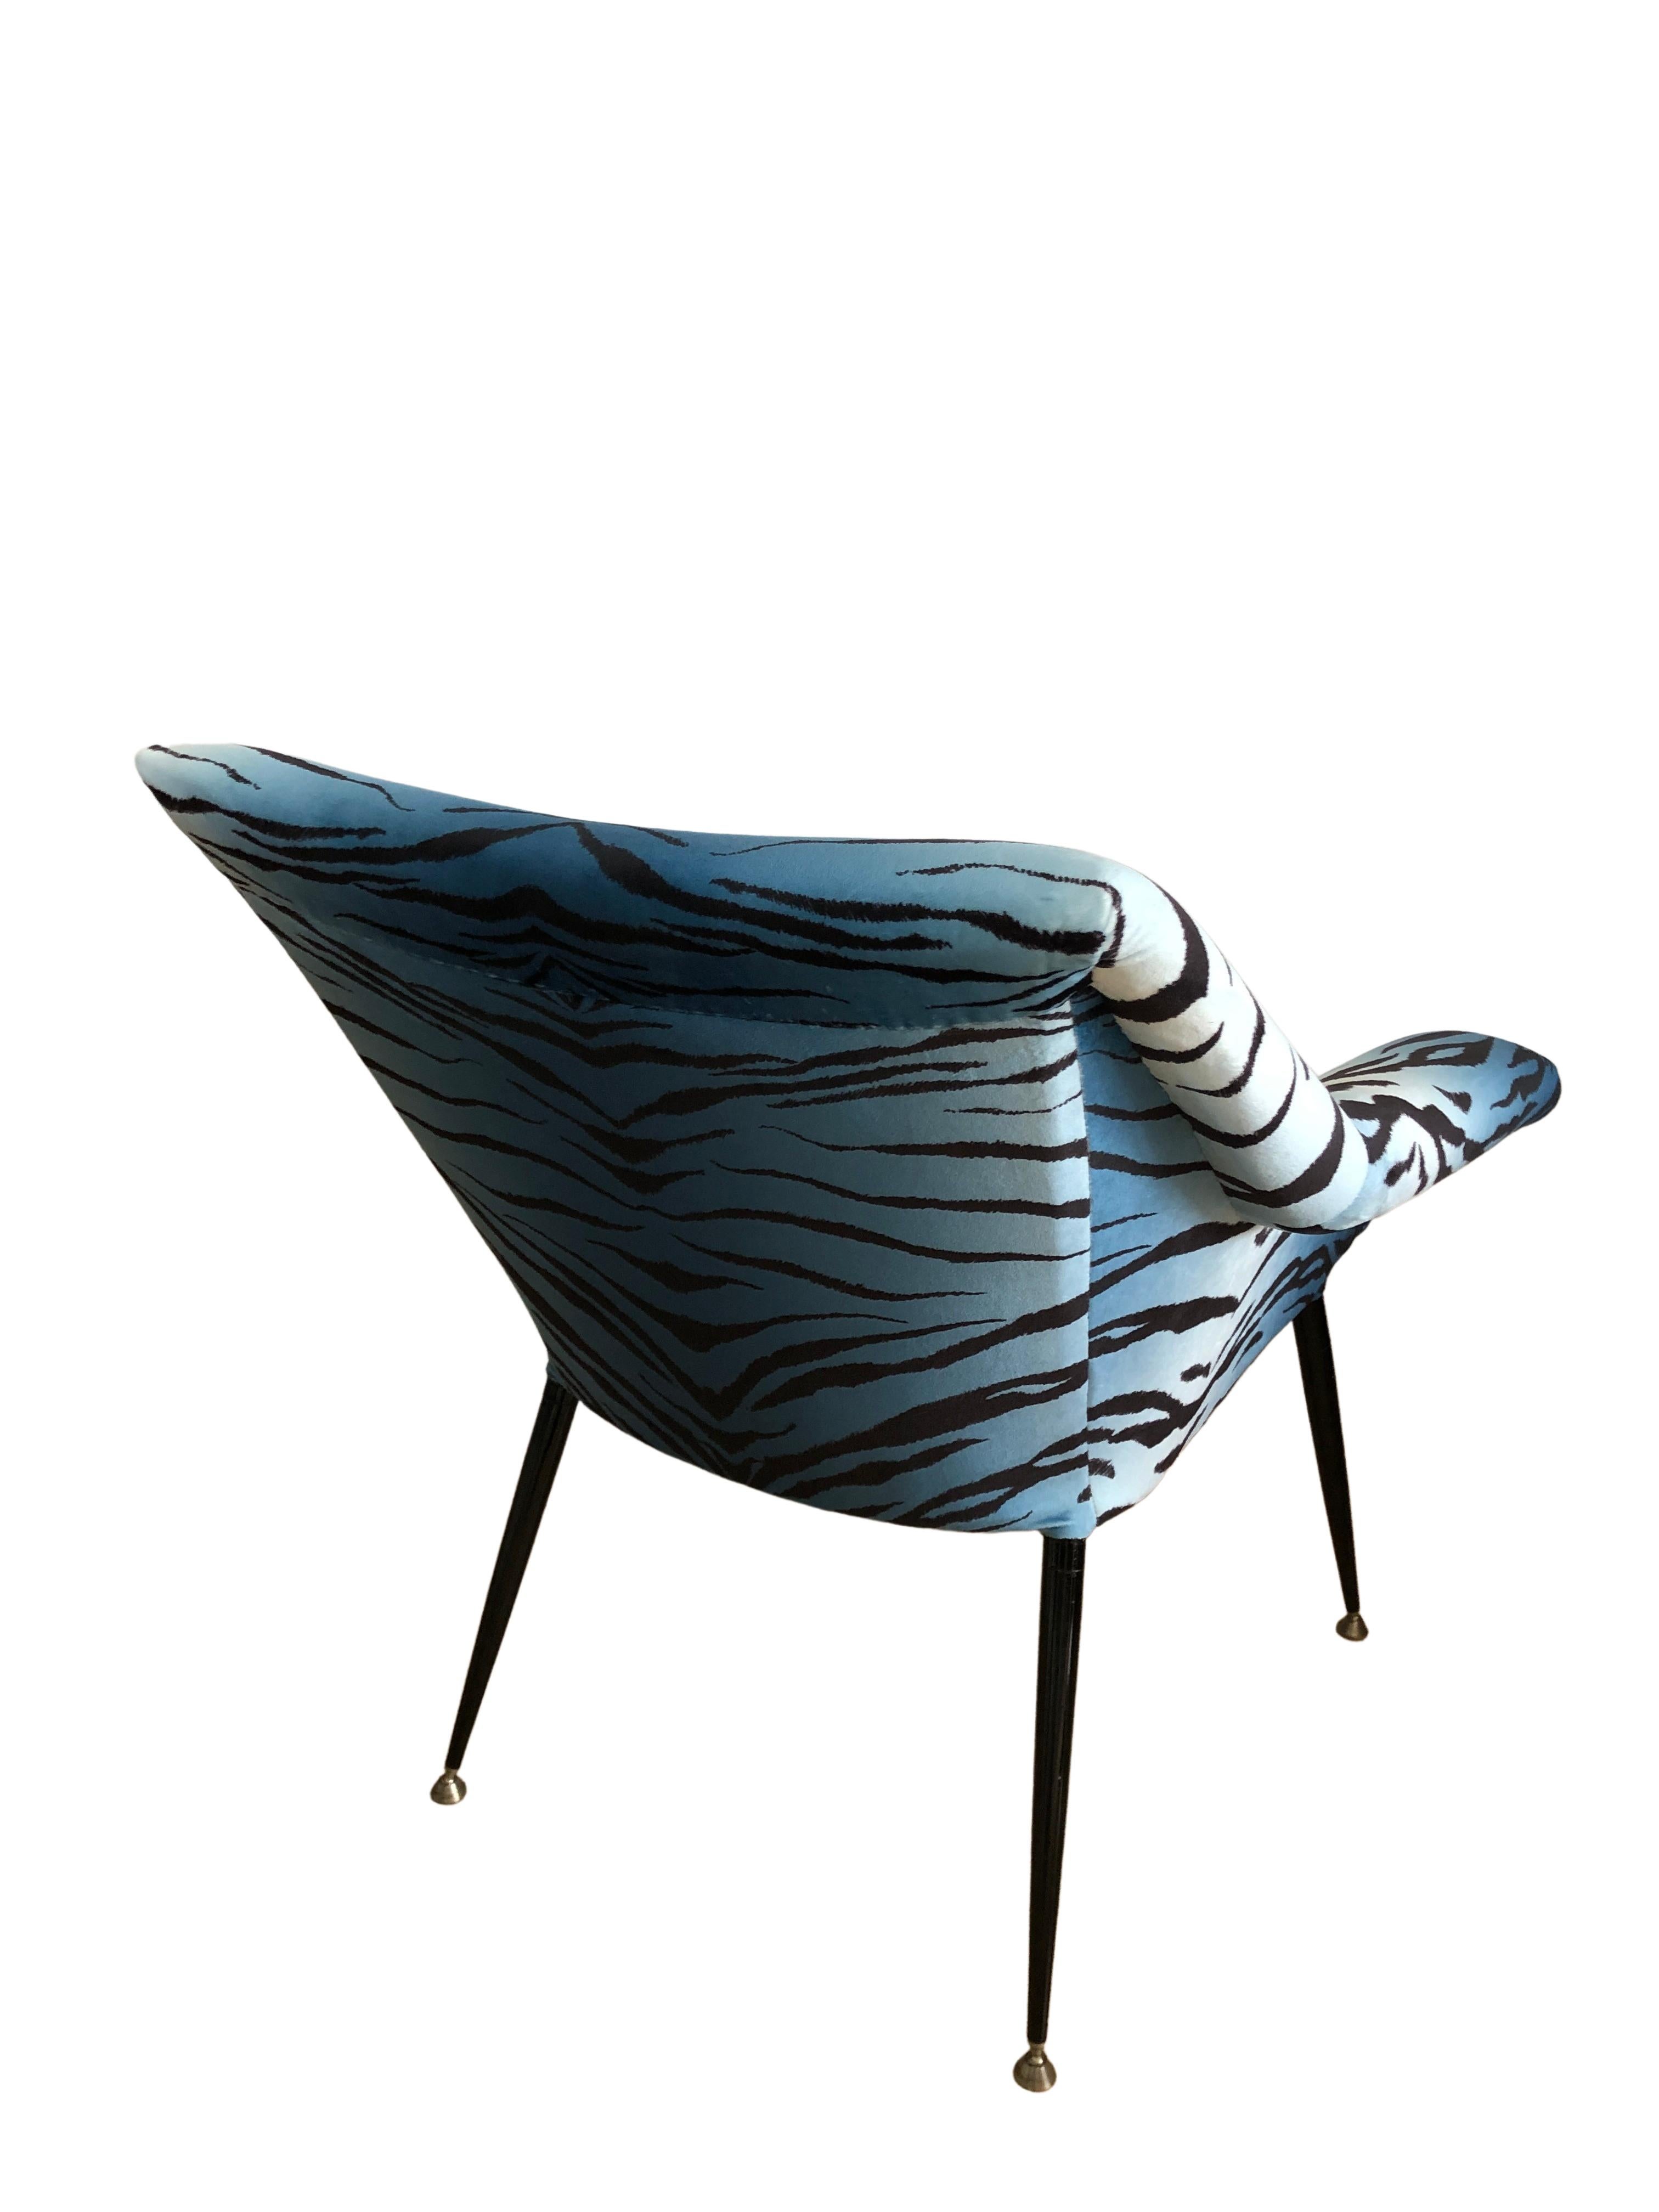 Hand-Crafted Set of Two Midcentury Armchairs, in Blue Zebra Print Velvet, Europe, 1960s For Sale